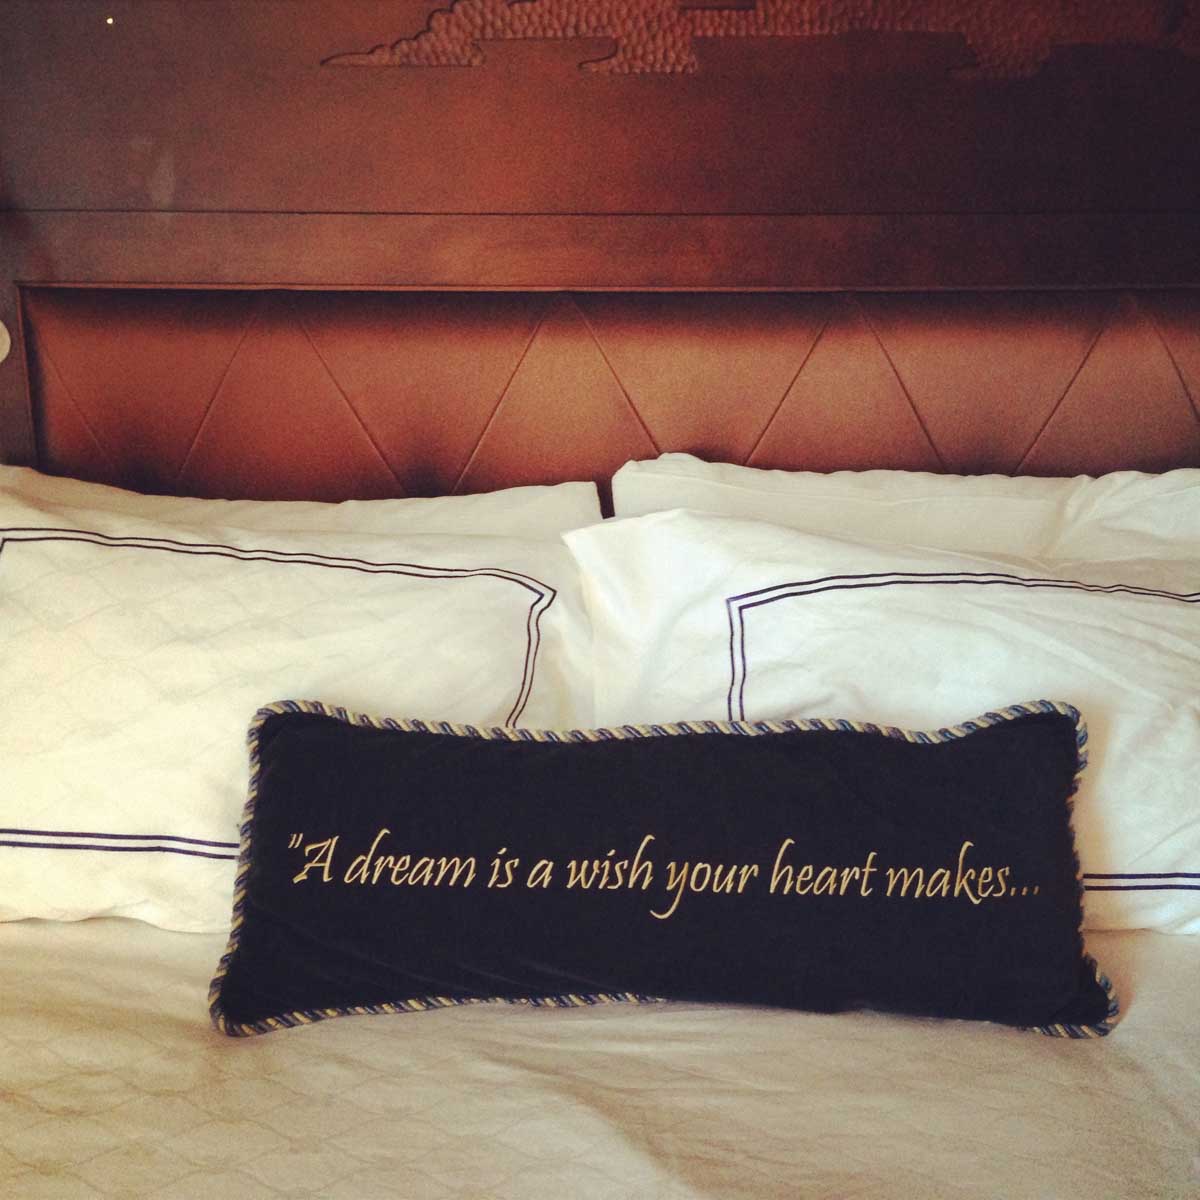 An embroidered pillow on a hotel bed.